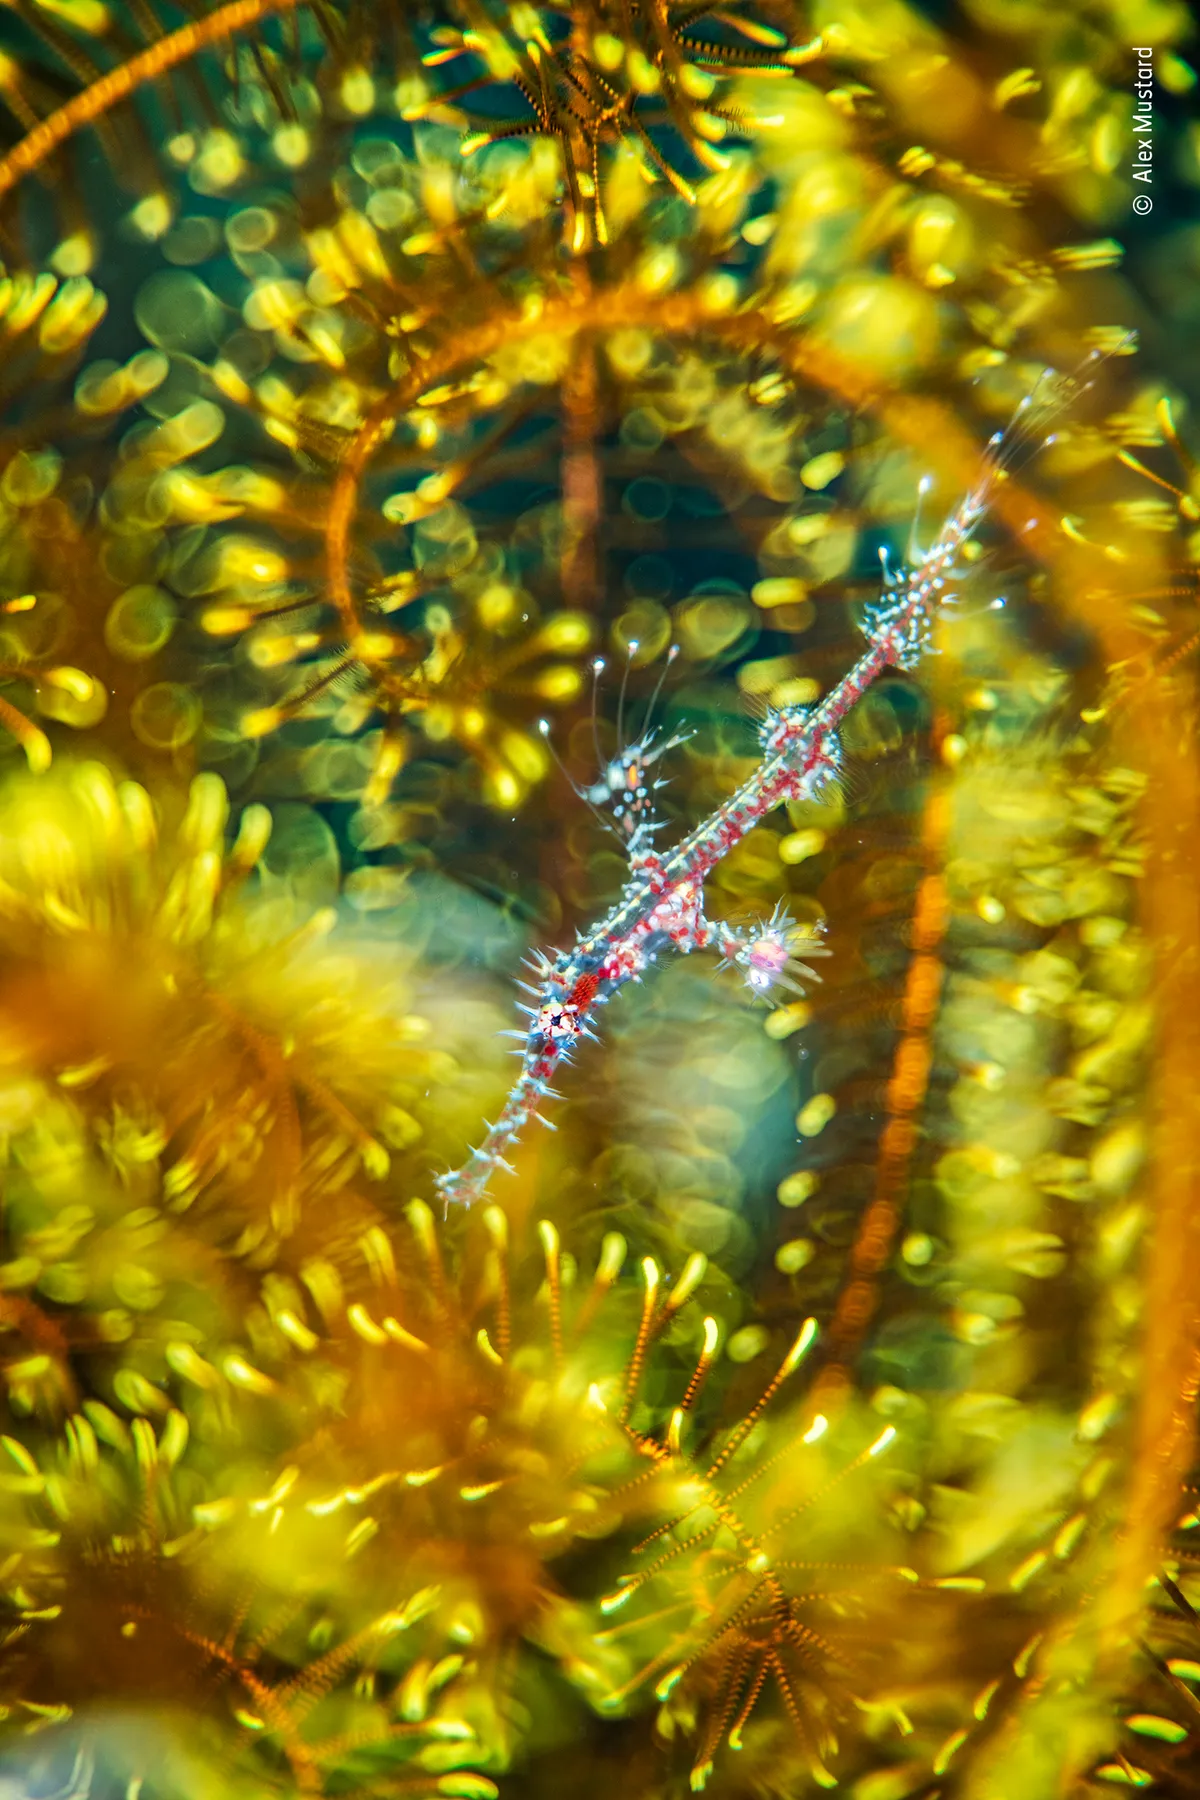 Amongst yellow and orange weed, a small pipefish with pink colouration swims.